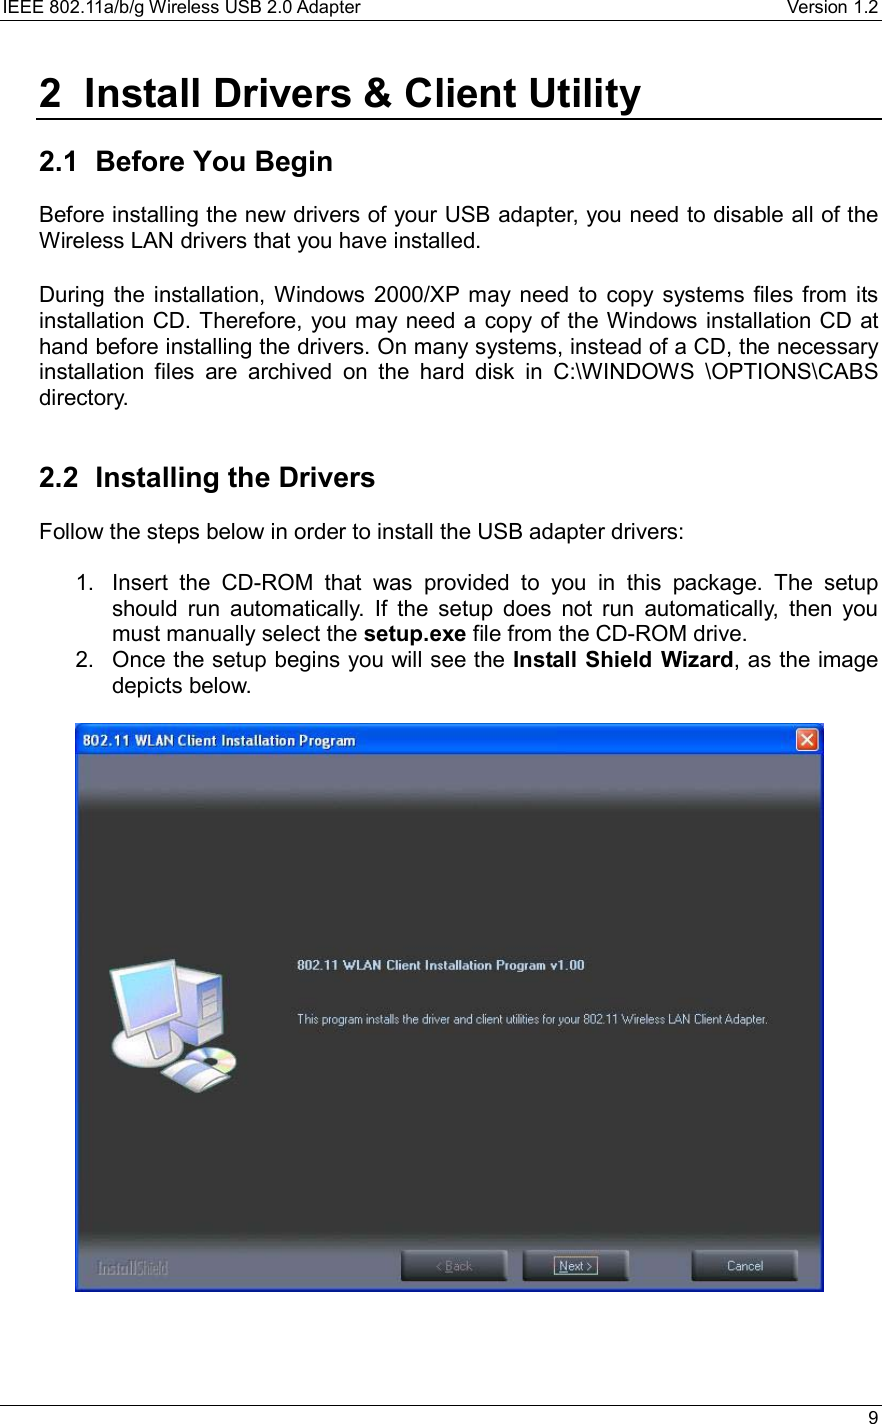 IEEE 802.11a/b/g Wireless USB 2.0 Adapter    Version 1.2   9  2  Install Drivers &amp; Client Utility  2.1  Before You Begin Before installing the new drivers of your USB adapter, you need to disable all of the Wireless LAN drivers that you have installed.  During the installation, Windows 2000/XP may need to copy systems files from its installation CD. Therefore, you may need a copy of the Windows installation CD at hand before installing the drivers. On many systems, instead of a CD, the necessary installation files are archived on the hard disk in C:\WINDOWS \OPTIONS\CABS directory.   2.2 Installing the Drivers Follow the steps below in order to install the USB adapter drivers:  1.  Insert the CD-ROM that was provided to you in this package. The setup should run automatically. If the setup does not run automatically, then you must manually select the setup.exe file from the CD-ROM drive. 2.  Once the setup begins you will see the Install Shield Wizard, as the image depicts below.      